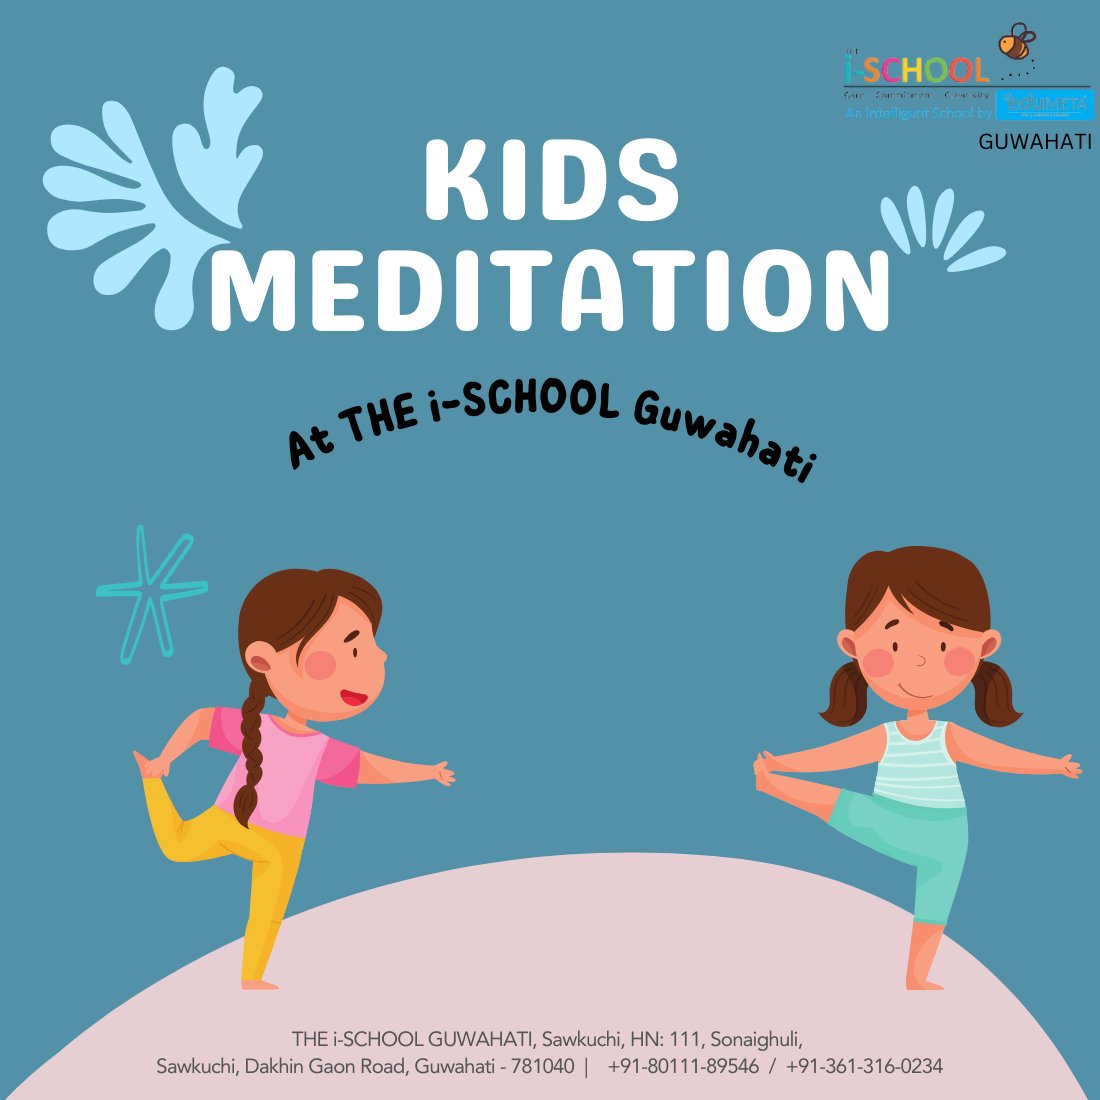 🧘‍♀️🧘Did you know that even our littlest learners benefit from a moment of tranquility? 

At THE i-SCHOOL, we've embraced the magic of meditation for our tiny tots. 🧘‍♀️🧘🧘‍♂️

#MeditationForKids #LittleMindsAtPeace #THE_i_SCHOOL #Guwahati